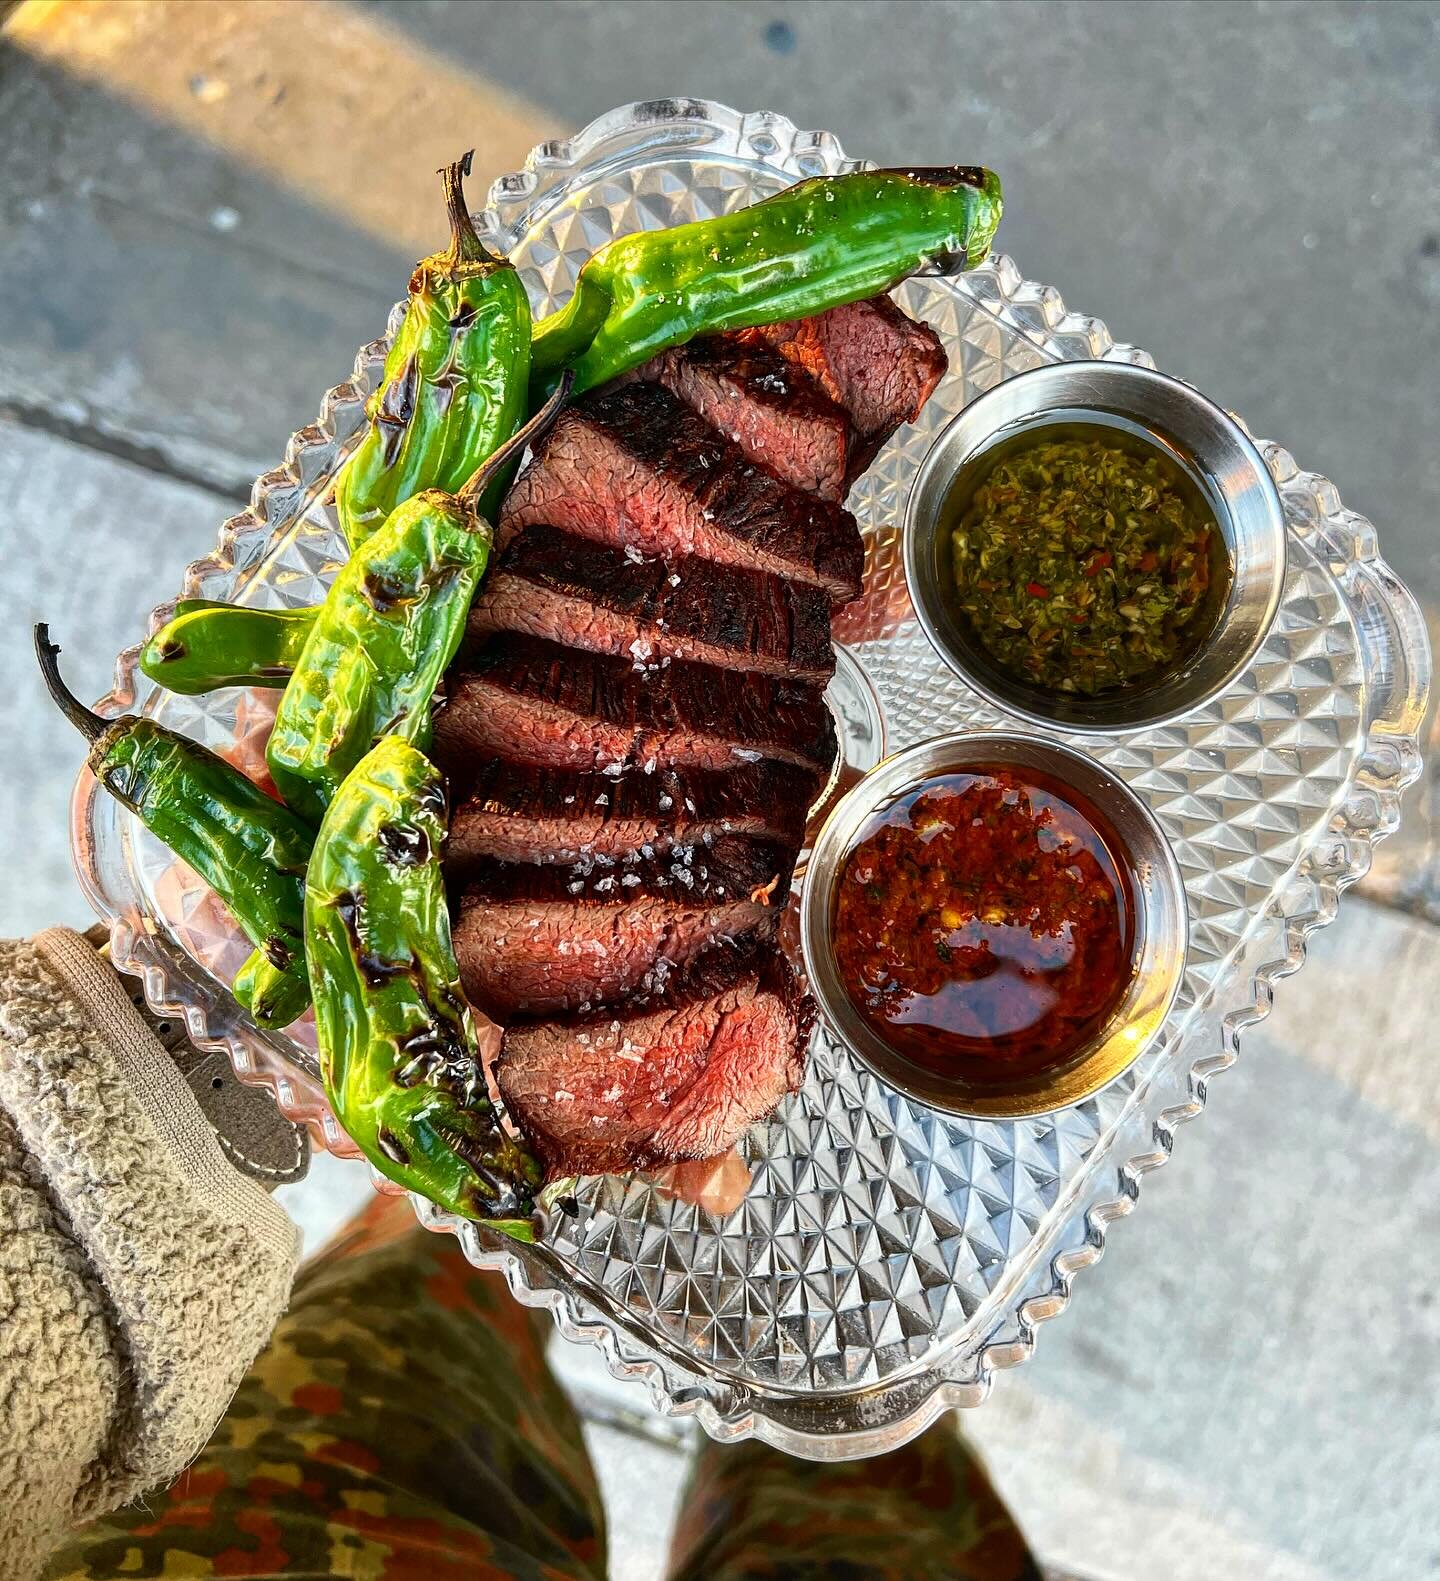 WEEKEND SPEC @416SHORTTURN - ARGENTINIAN BBQ! eight ounces of tenderloin with chimichurri. it&rsquo;s also our ONE YEAR ANNIVERSAY THERE so come clink a glass with us, ya herd? (yes, that&rsquo;s a cattle joke) 👅💦🌞🐄🔥👅💦🌞🐄🔥👅💦🌞🐄🔥👅💦🌞🐄?